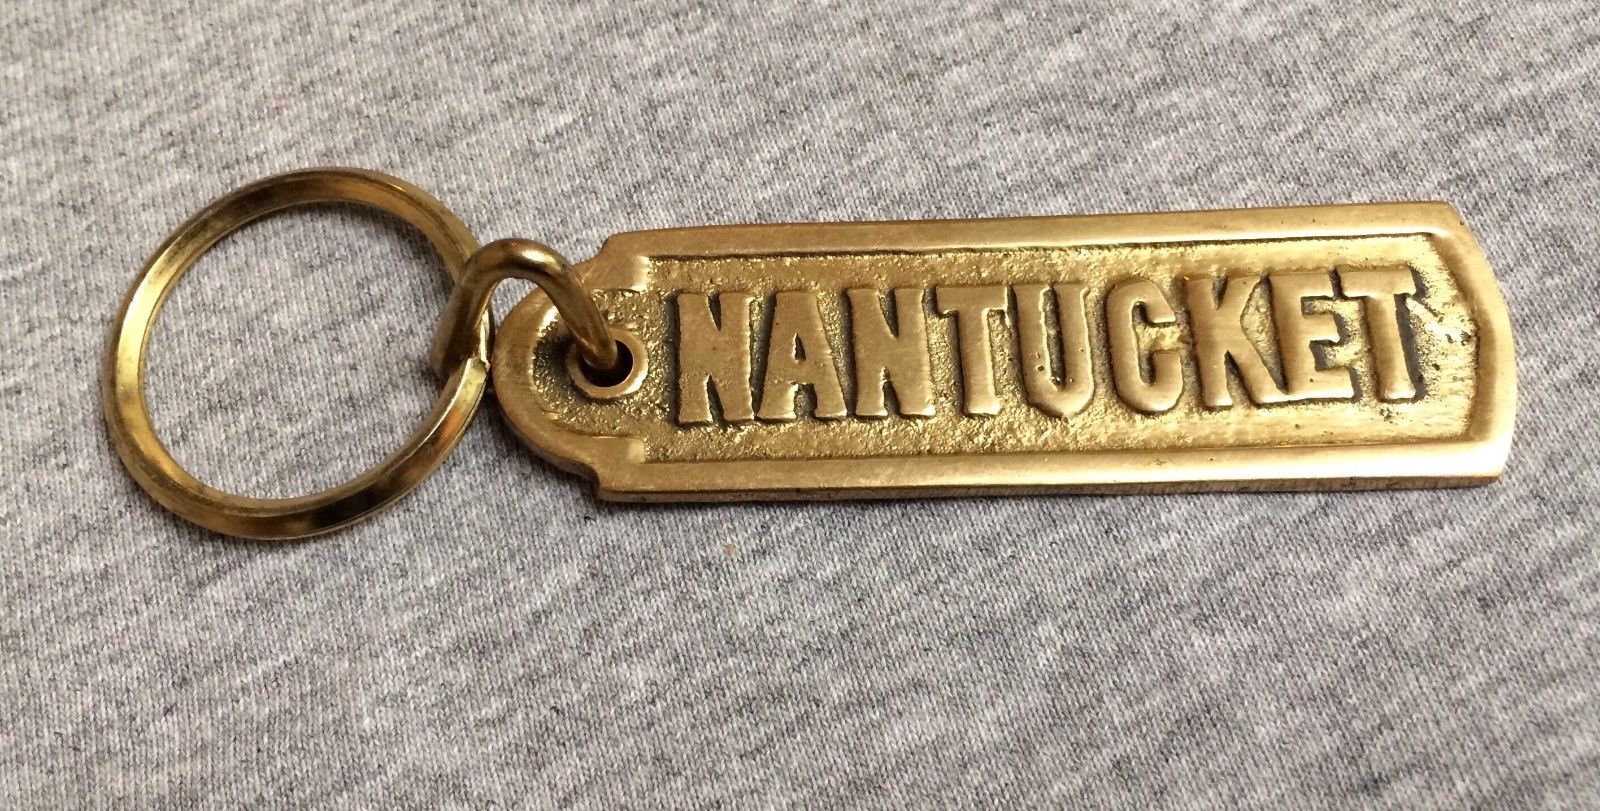 key chains -- Antique Price Guide